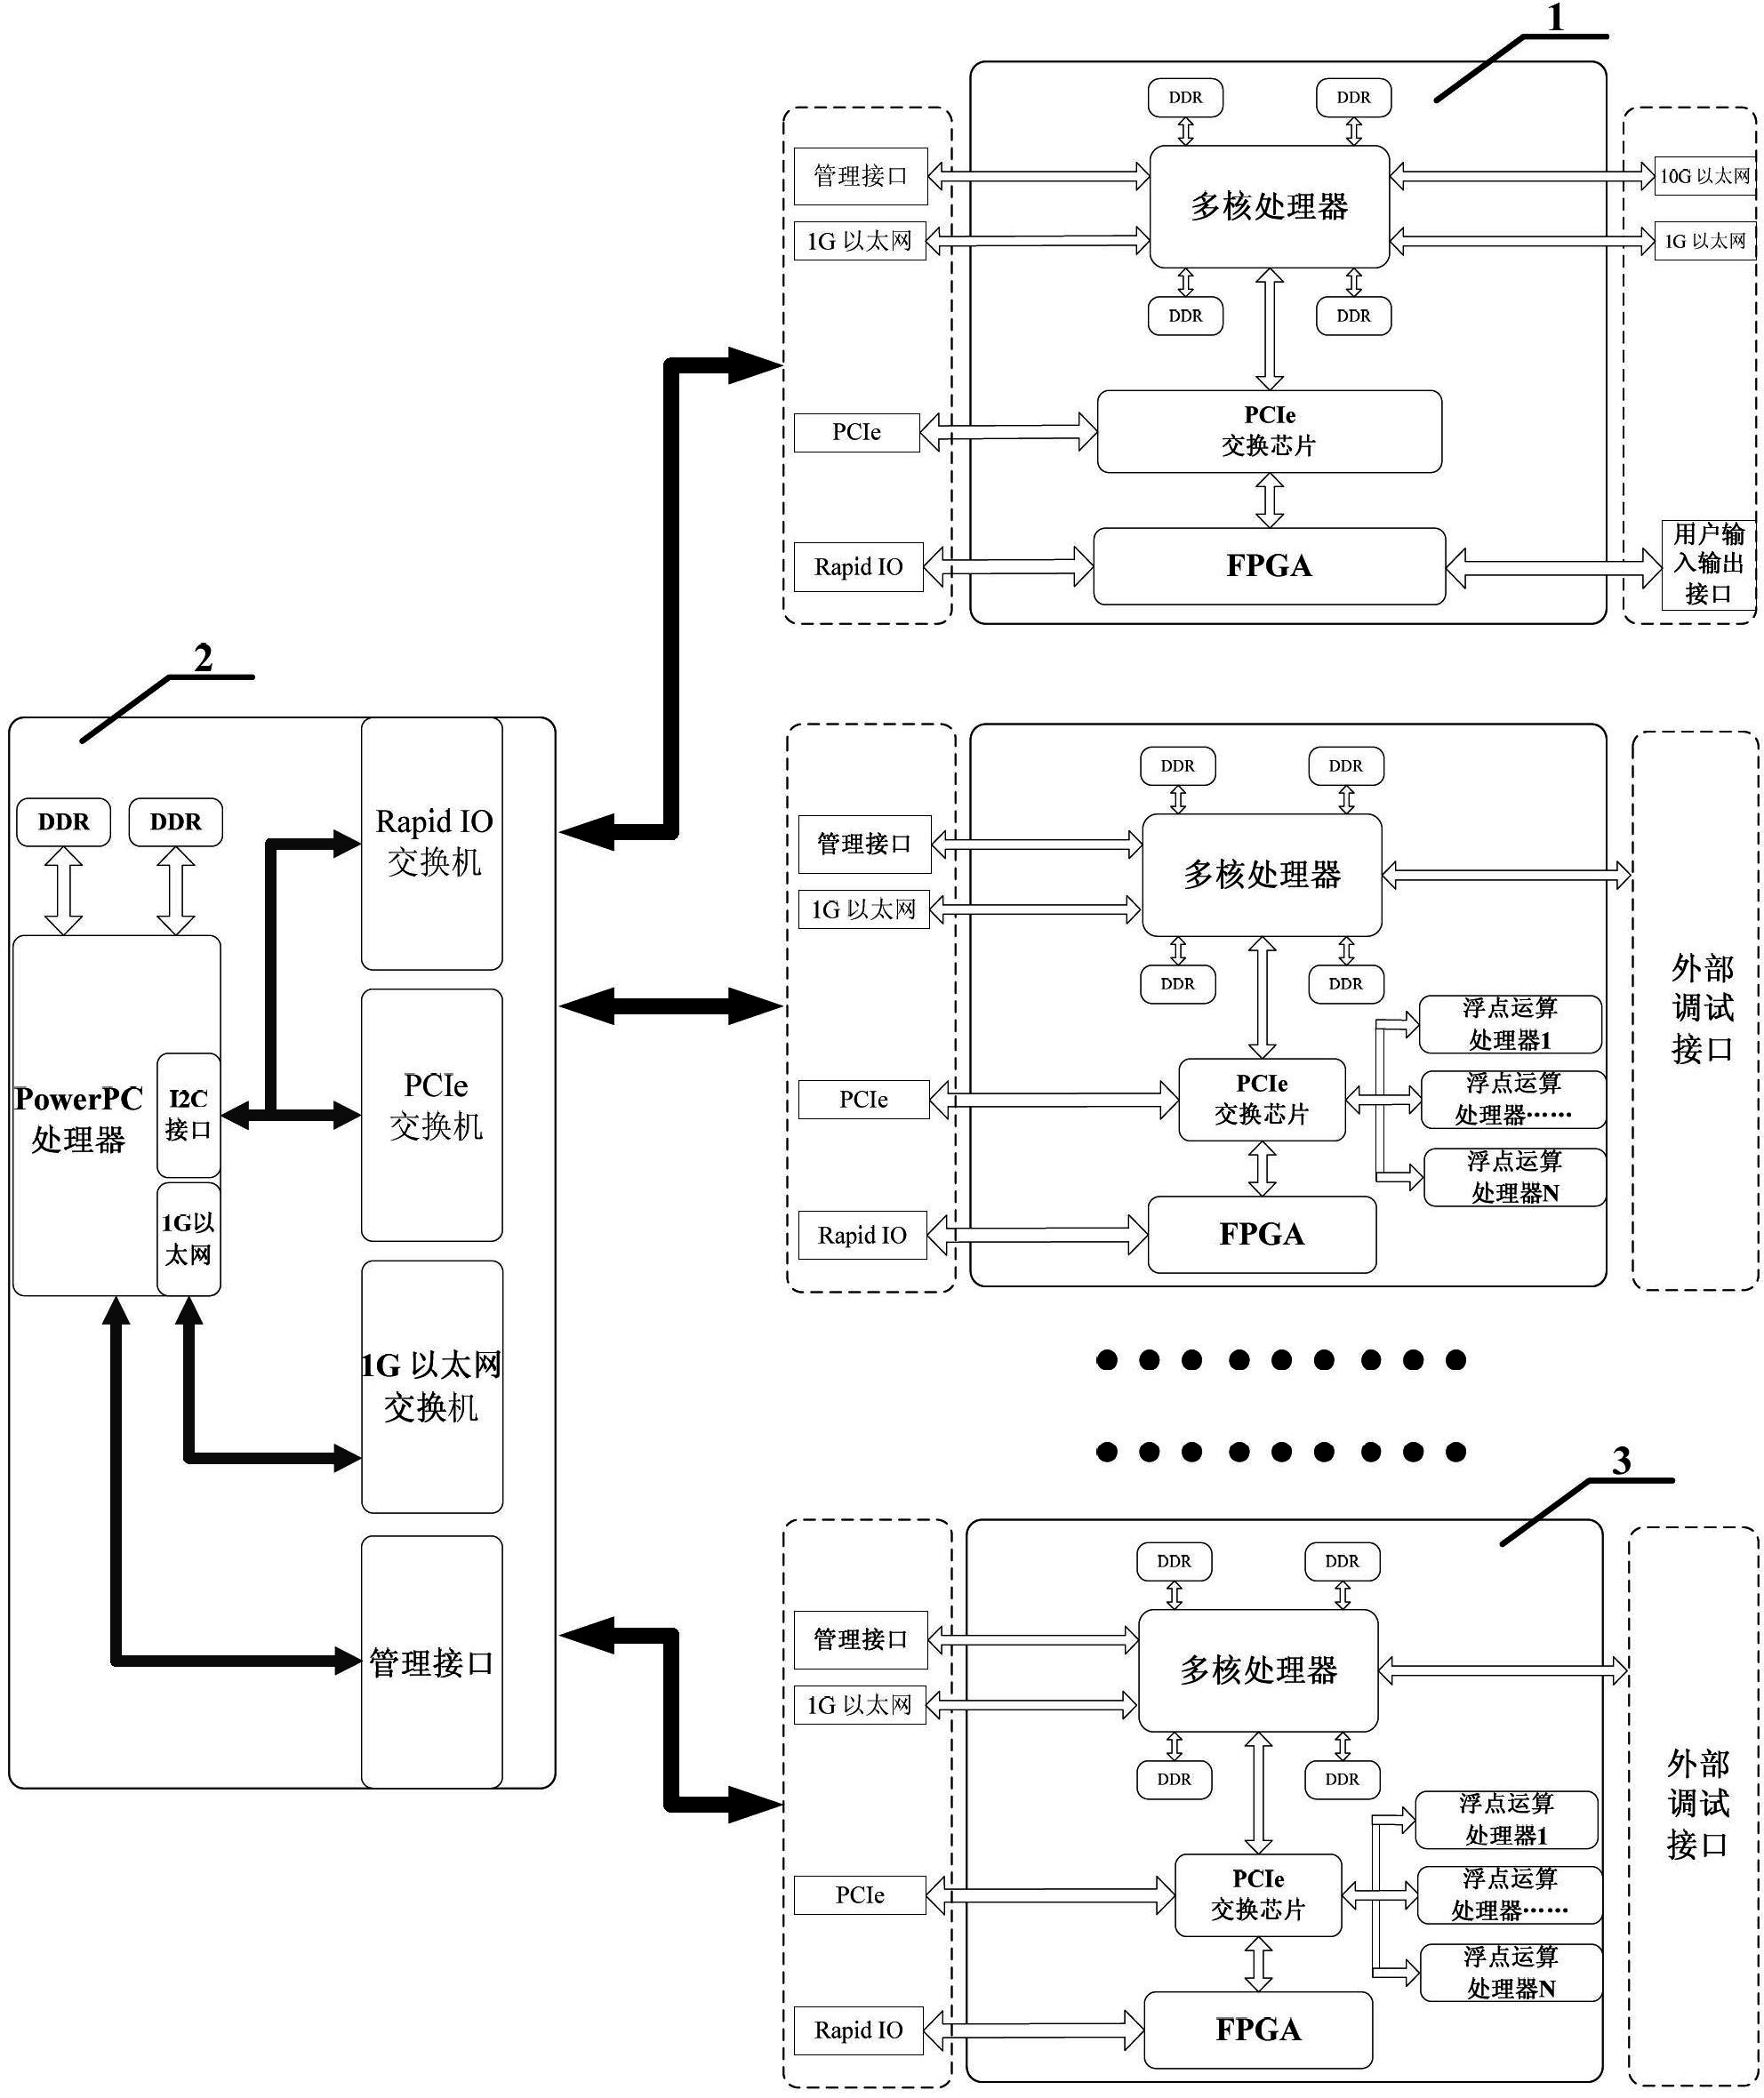 Data processing system based on VPX bus structure